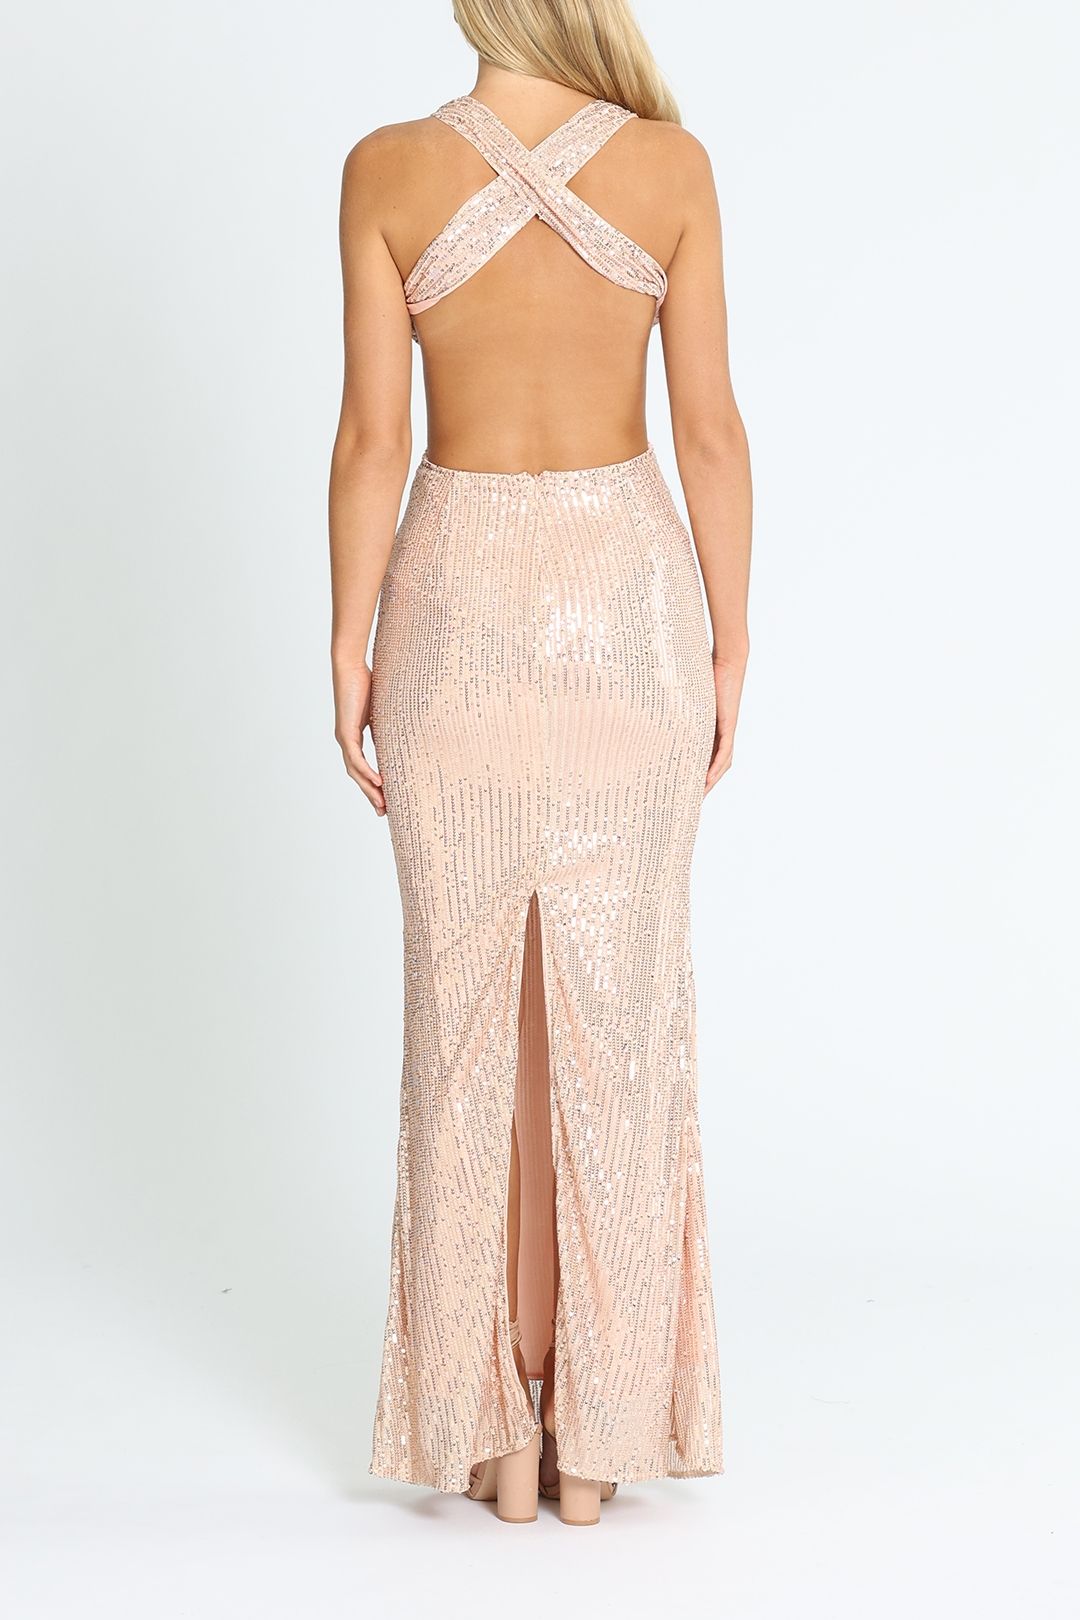 Elle Zeitoune Cut Out Detailed Sequin Gown Rose Gold Backless